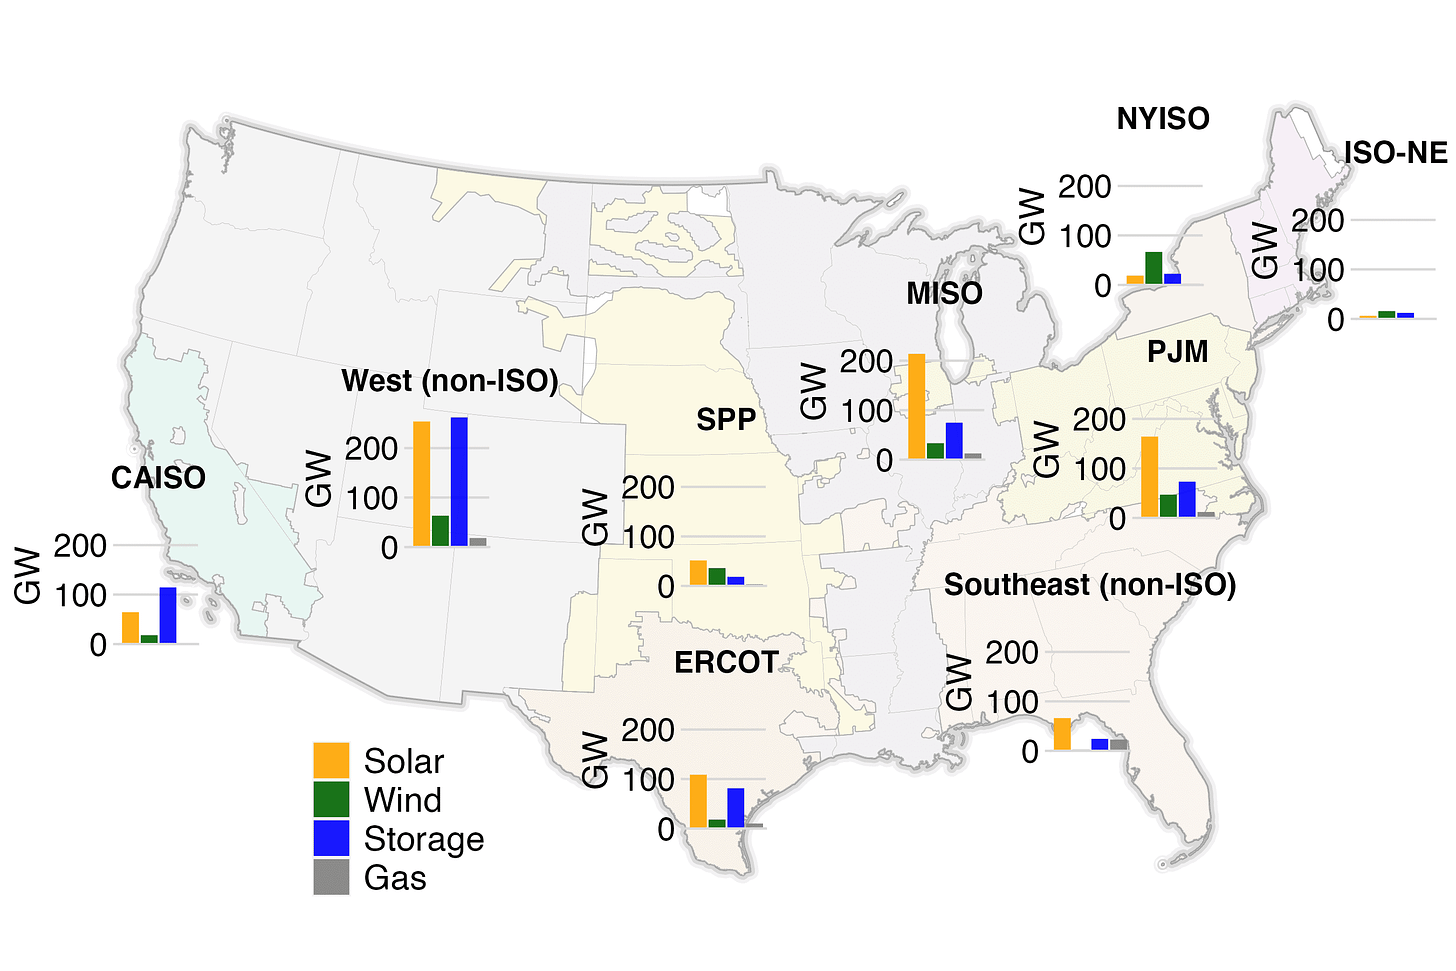 The amount of electricity generation in queues by region by type of power, according to the report on interconnection queues out of Lawrence Berkeley National Laboratory published Thursday. Chart courtesy Joseph Rand at Lawrence Berkeley National Laboratory.